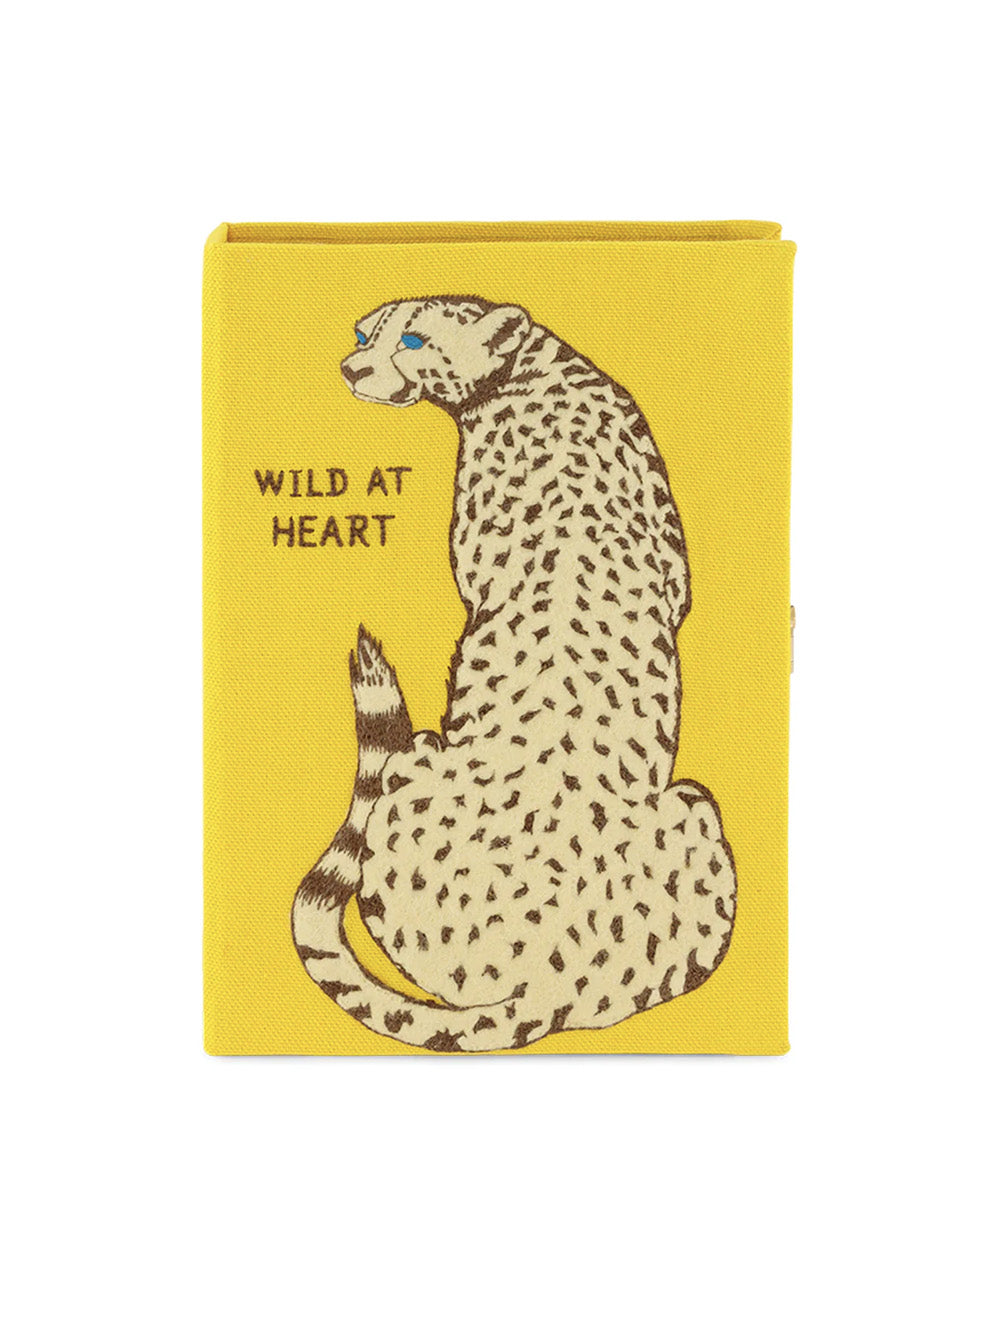 BOOK POUCH 'WILD AT HEART'